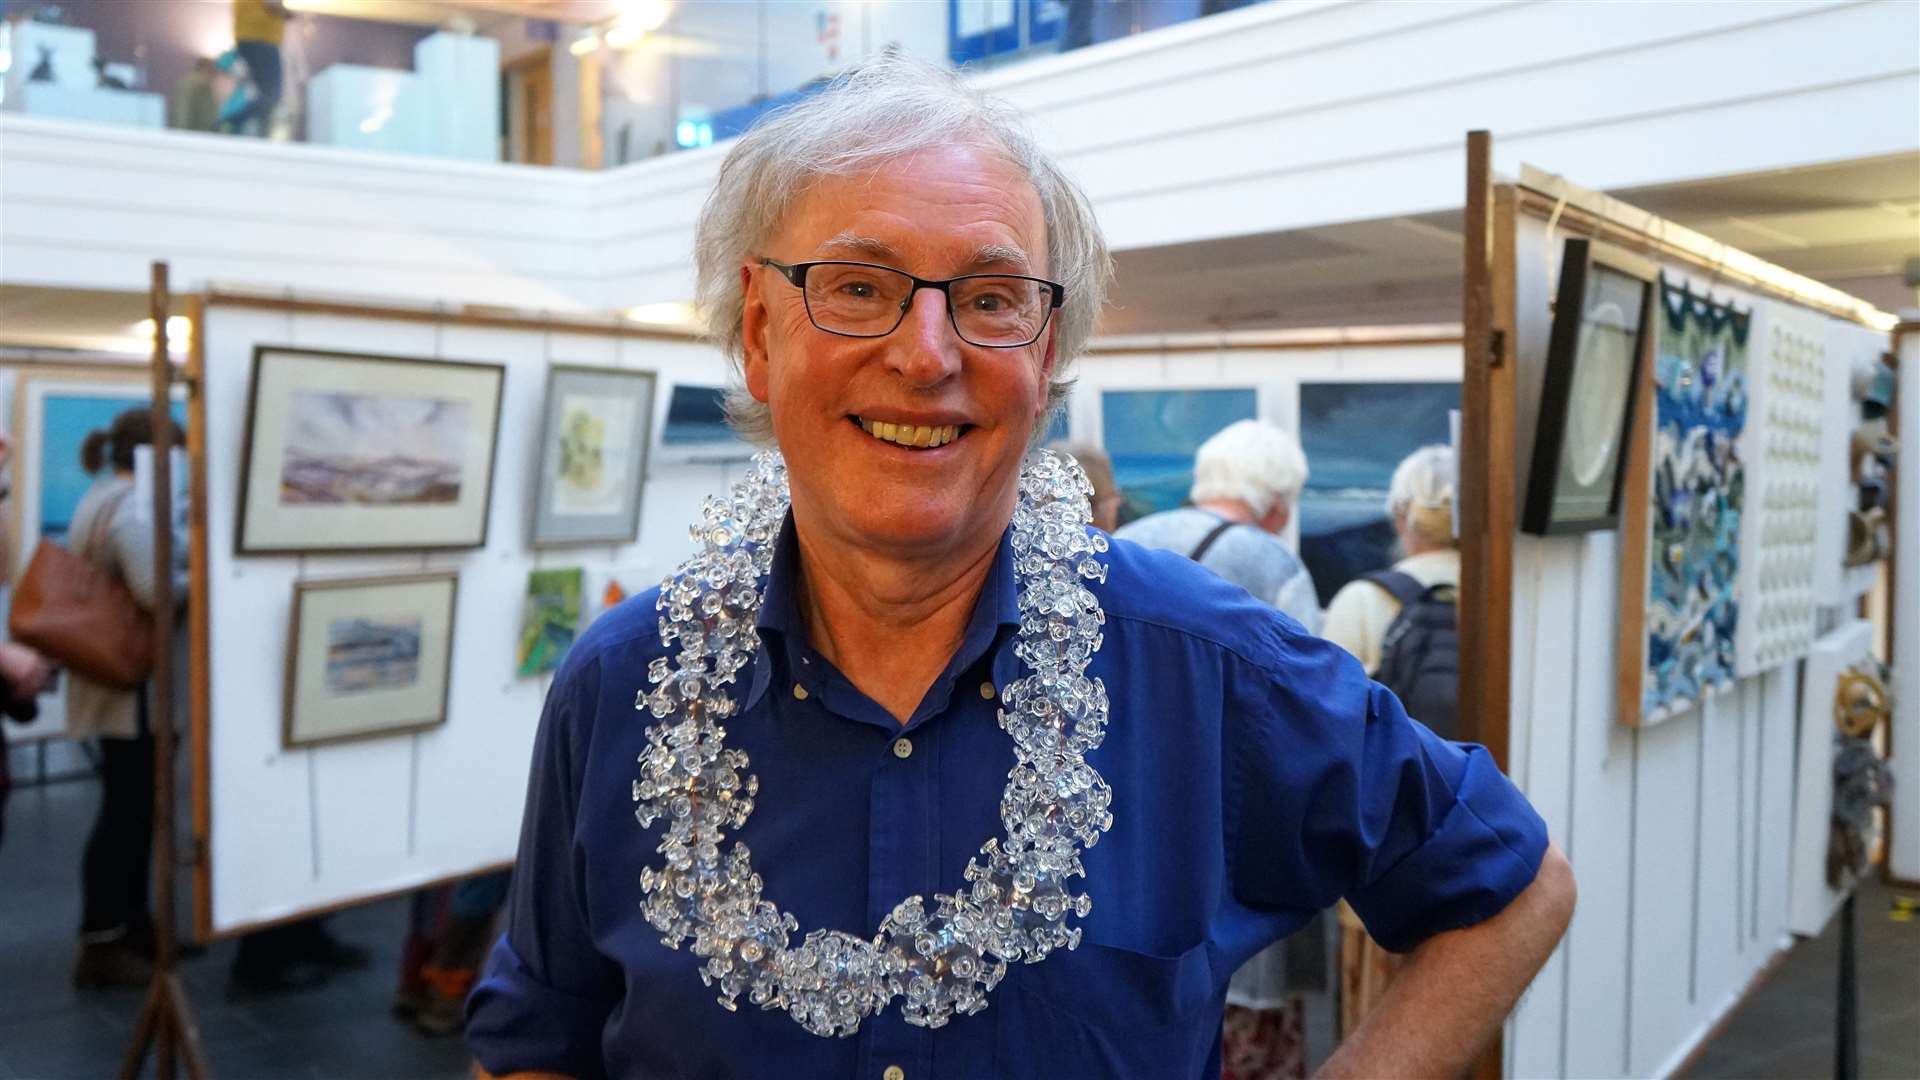 Ian Pearson at the Society of Caithness Artists exhibition in Thurso. Picture: DGS